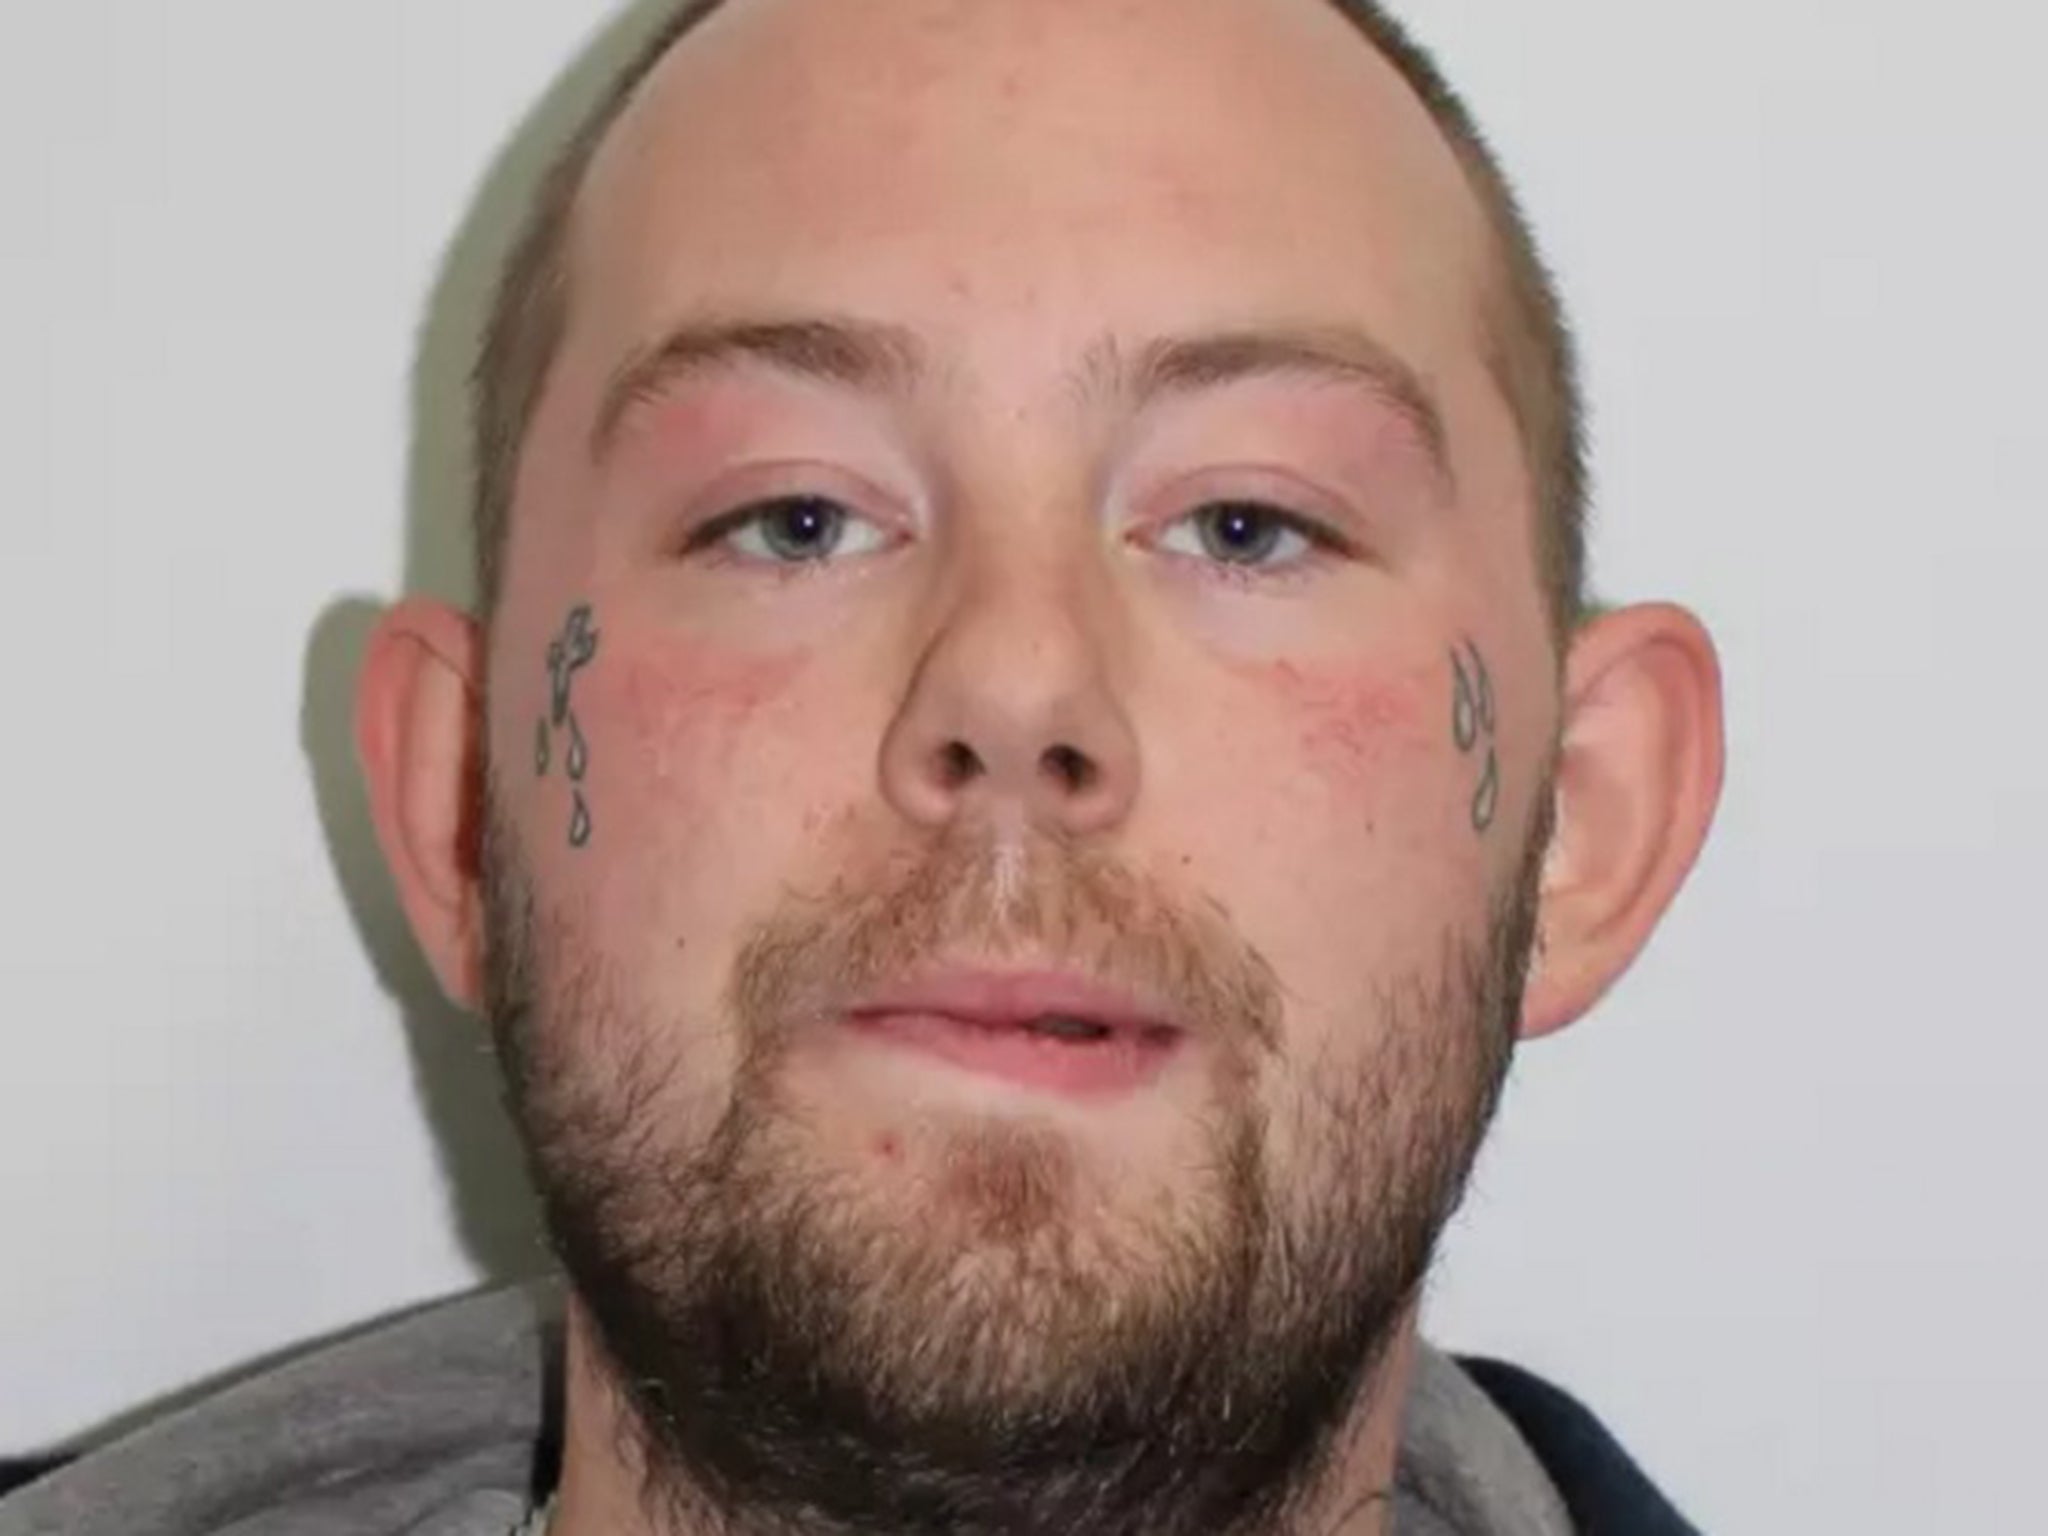 John Tomlin, 25, appeared at Thames Magistrates' Court on Tuesday charged with two counts of grievous bodily harm with intent